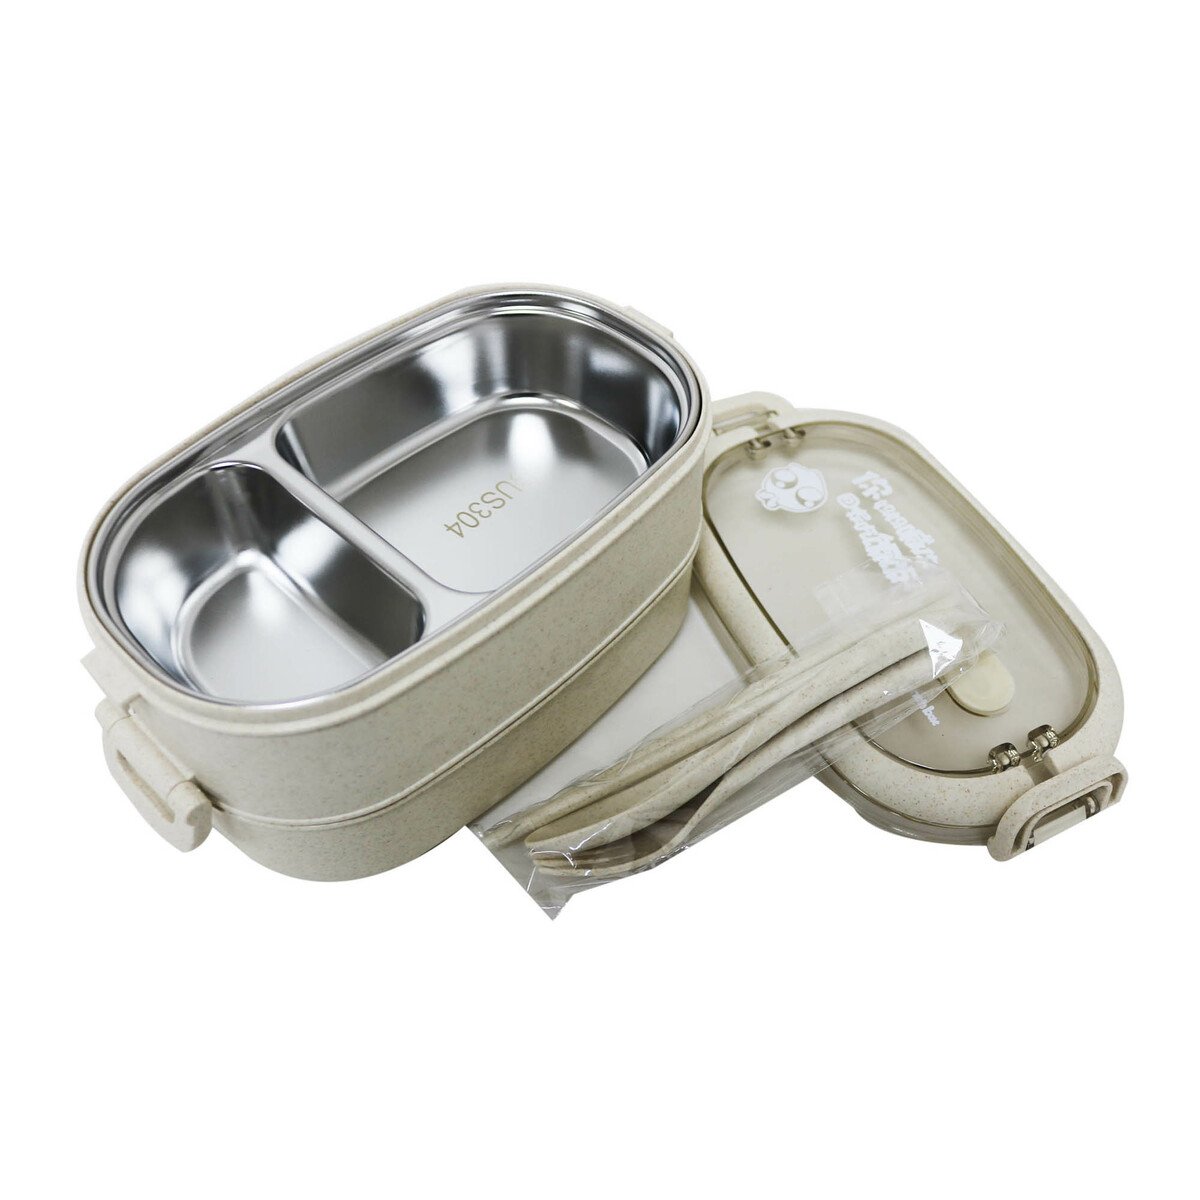 Lulu Lunch Box Wheat Stainless Steel 2Tier With Cutlery Ch4138